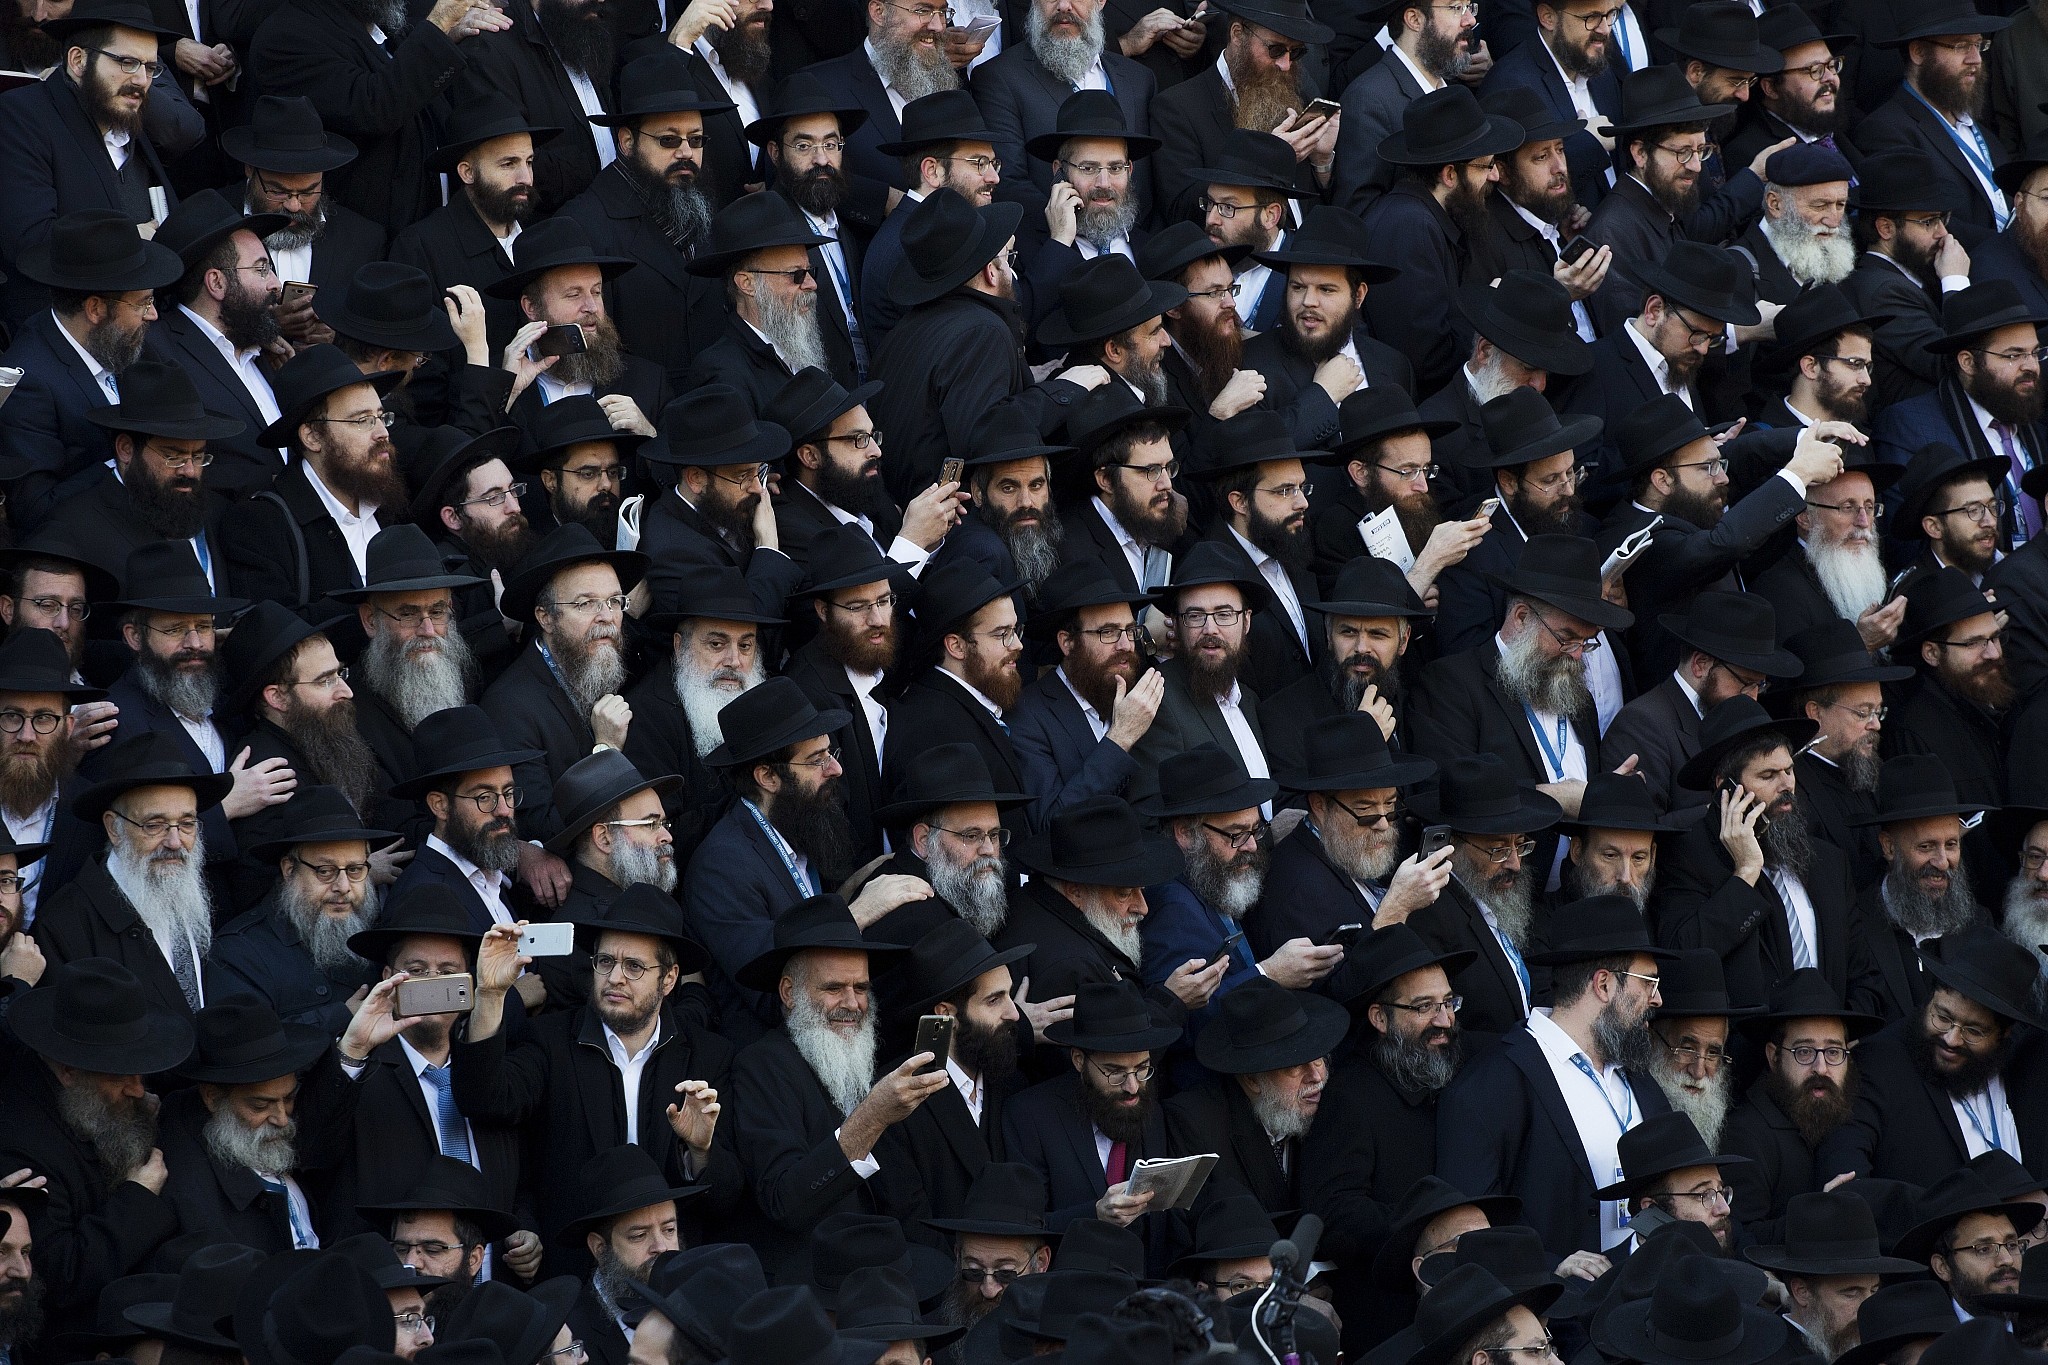 Illustrative: Crowds of rabbis gather for a group photo at the Chabad-Lubavitch World Headquarters, November 4, 2018, in New York.(AP Photo/Mark Lennihan)